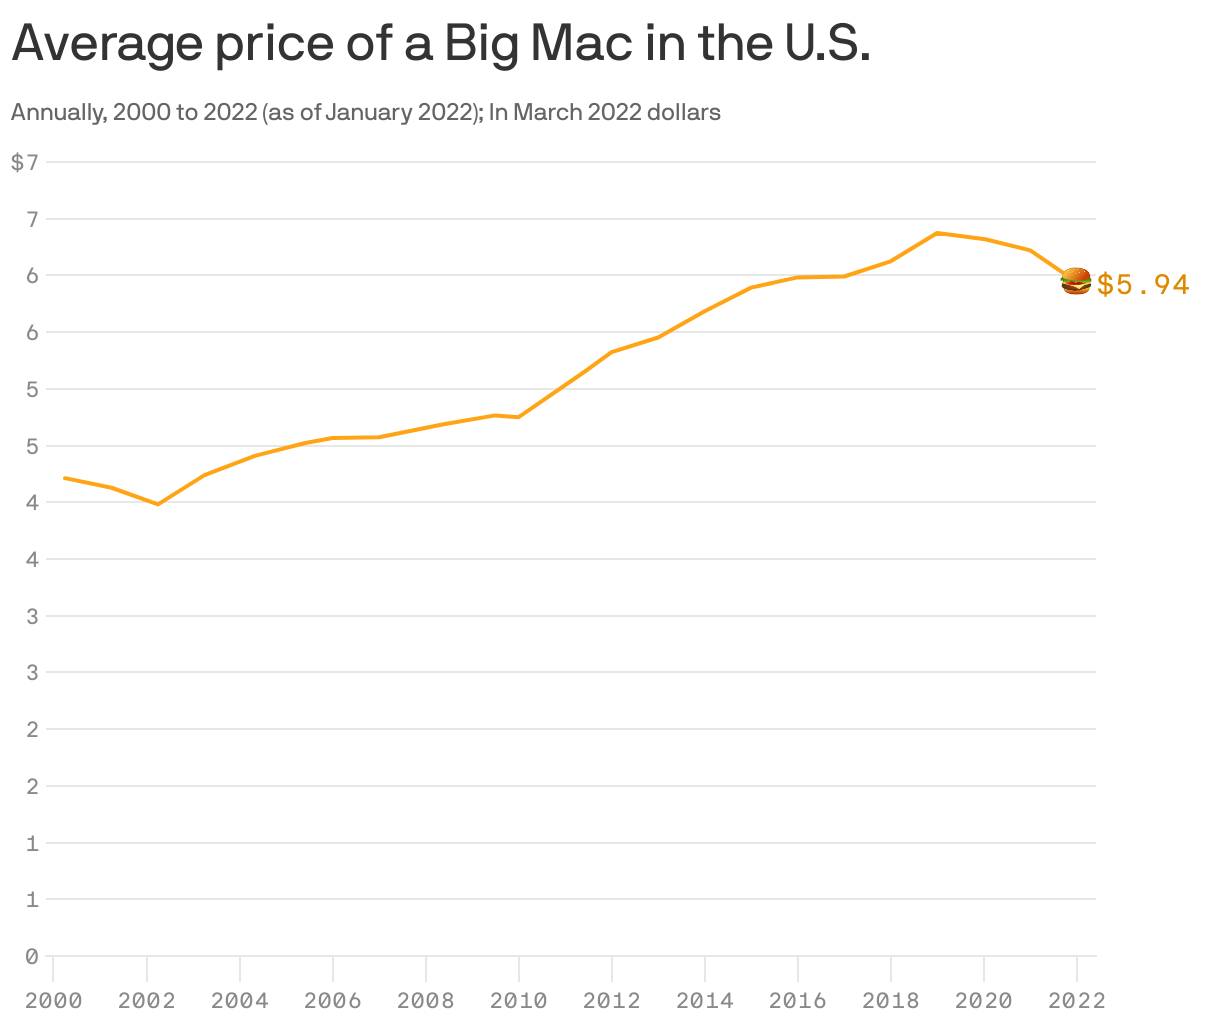 Inflation comes for the Big Mac